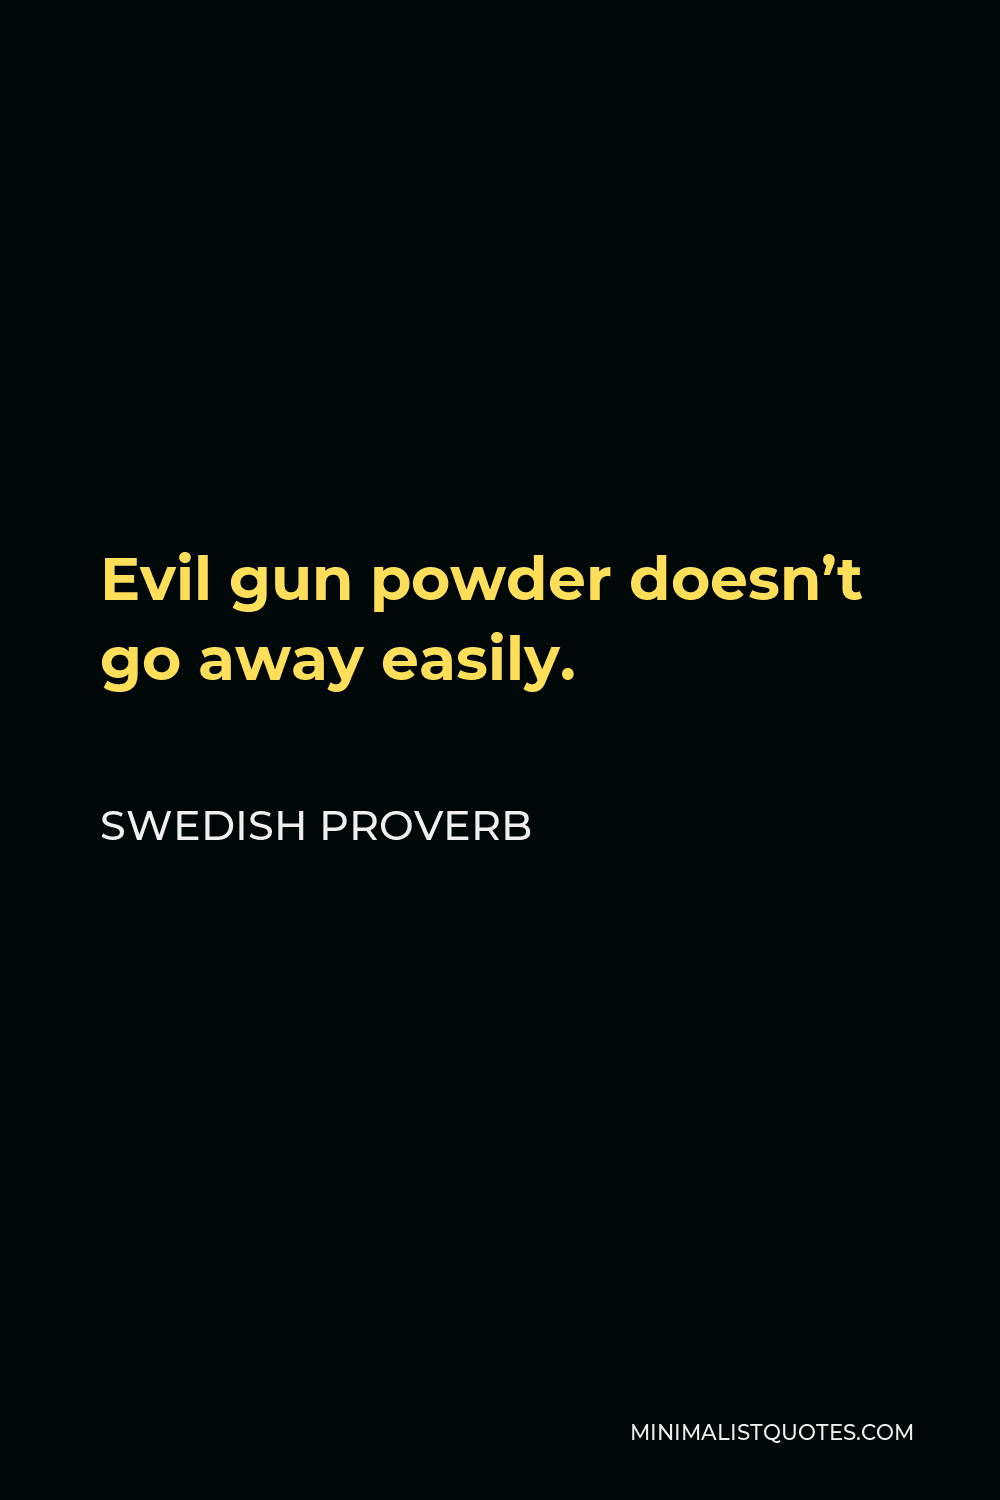 Swedish Proverb Quote - Evil gun powder doesn’t go away easily.